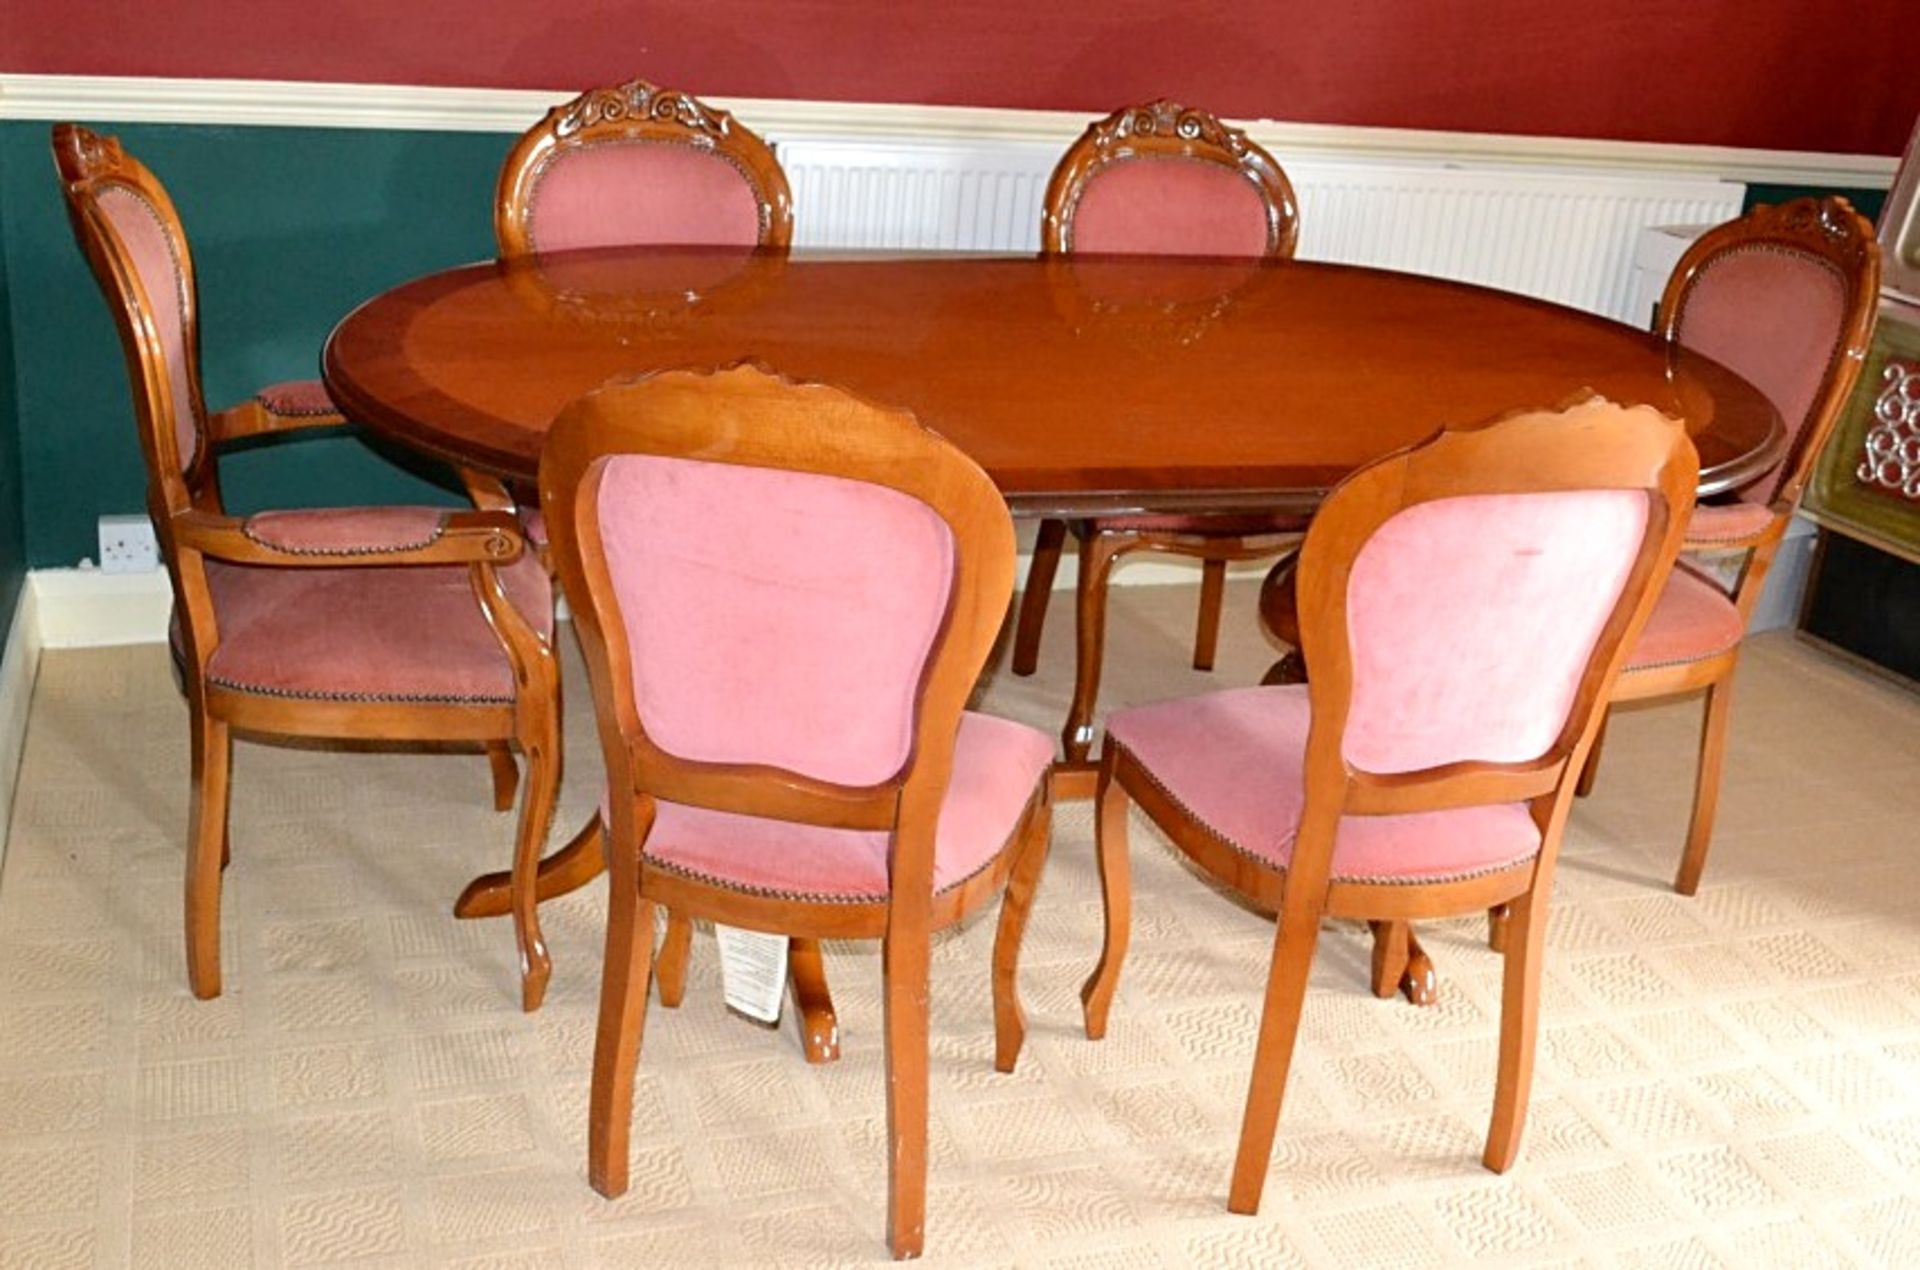 *Just Added* 1 x Large Solid Wood Dining Table With Chairs - From A Grade II Listed Hall In Very - Image 6 of 8